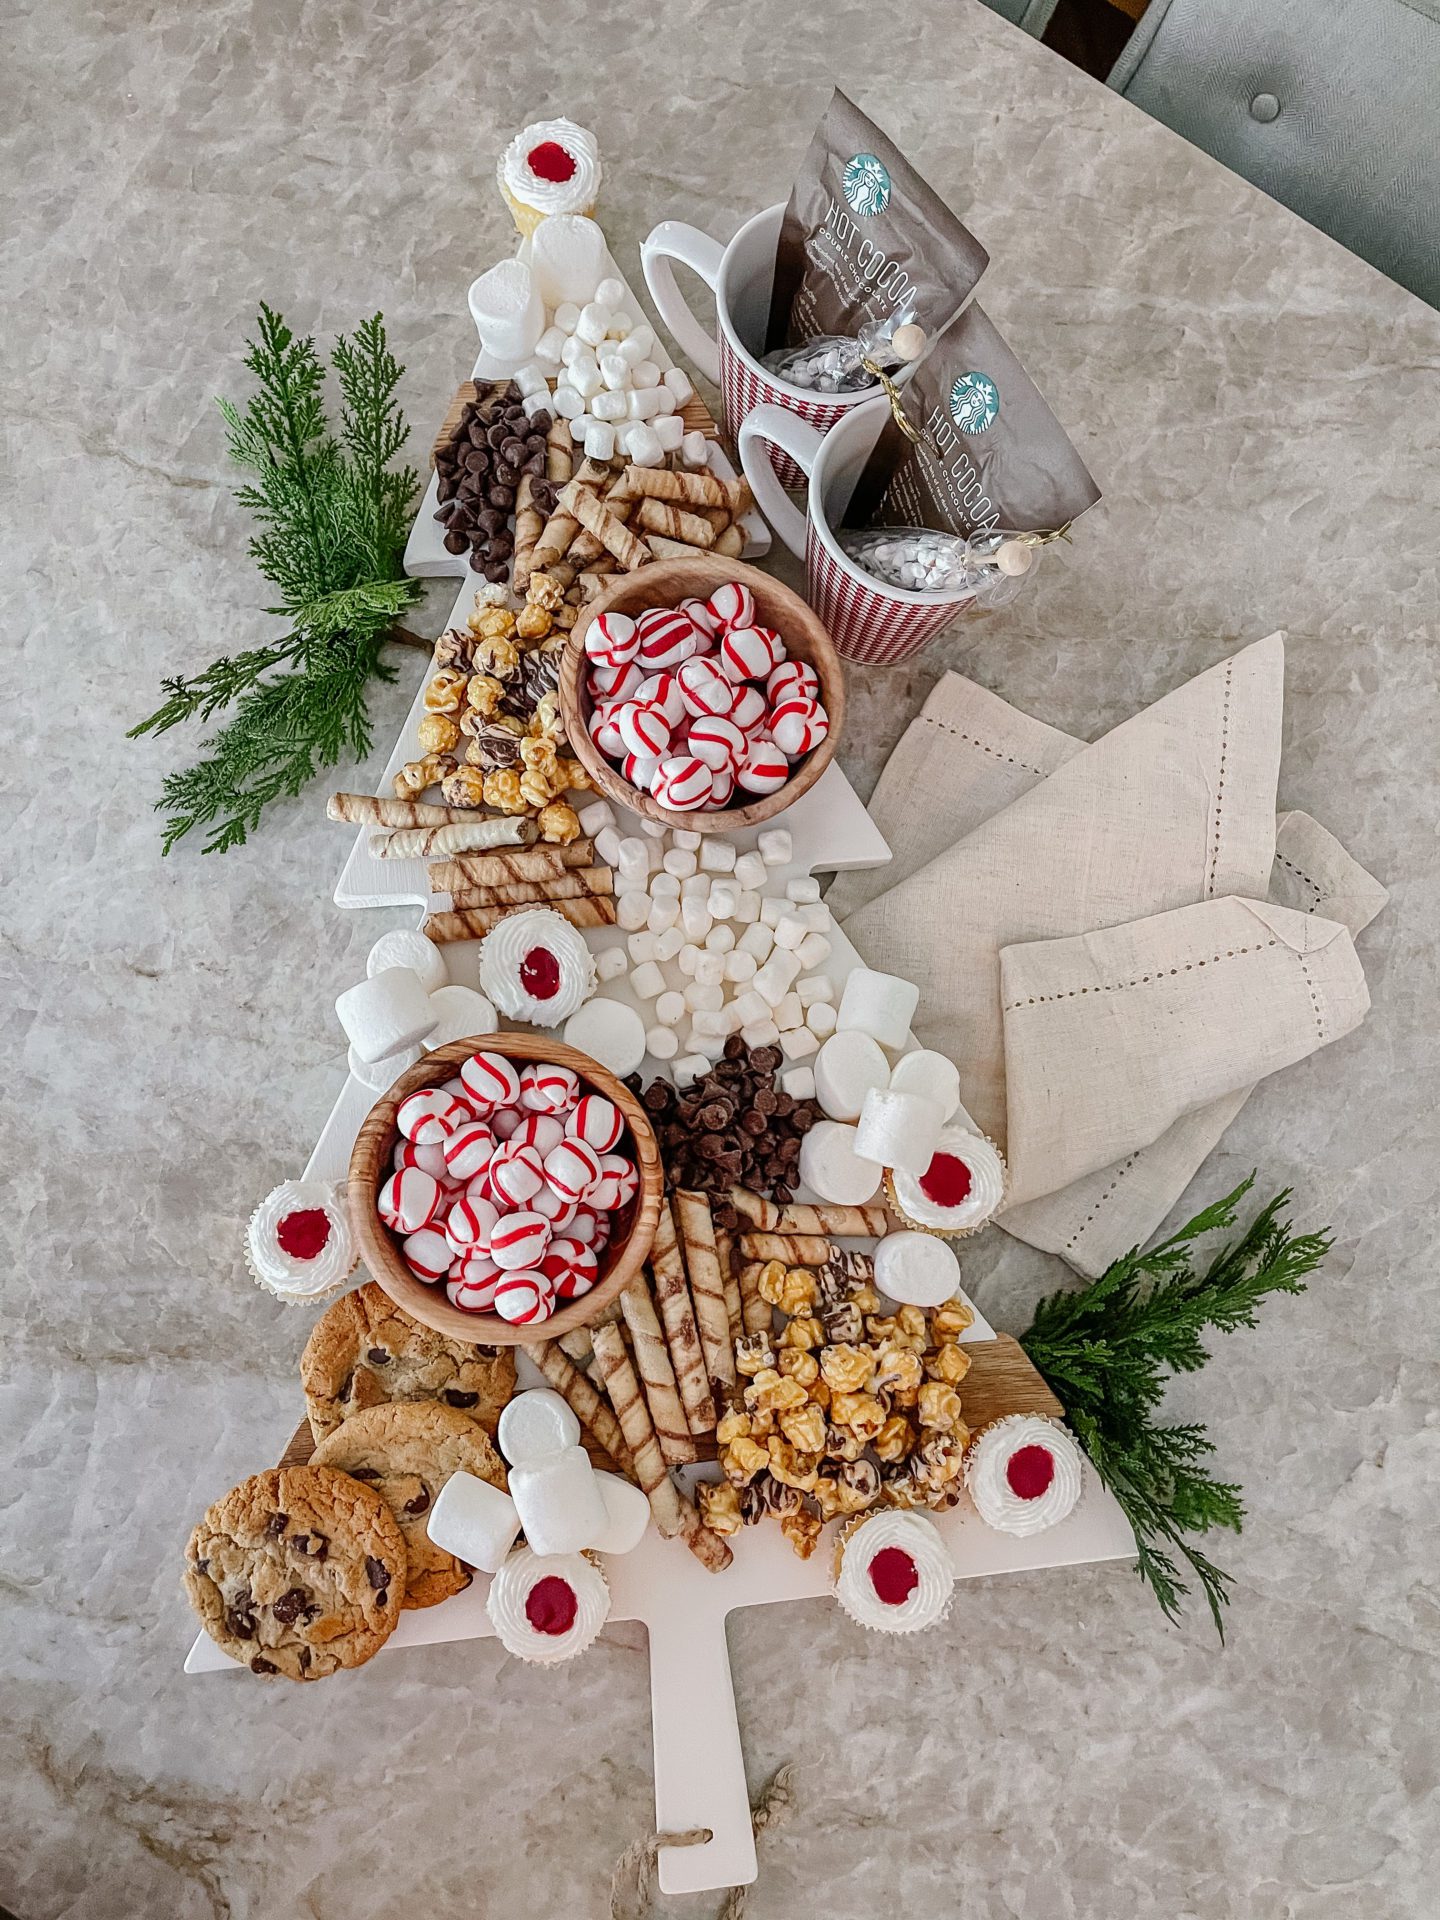 Throwing a party and need a Christmas Charcuterie Board? This Christmas Tree Charcuterie Board will take less than 5 minutes to make!